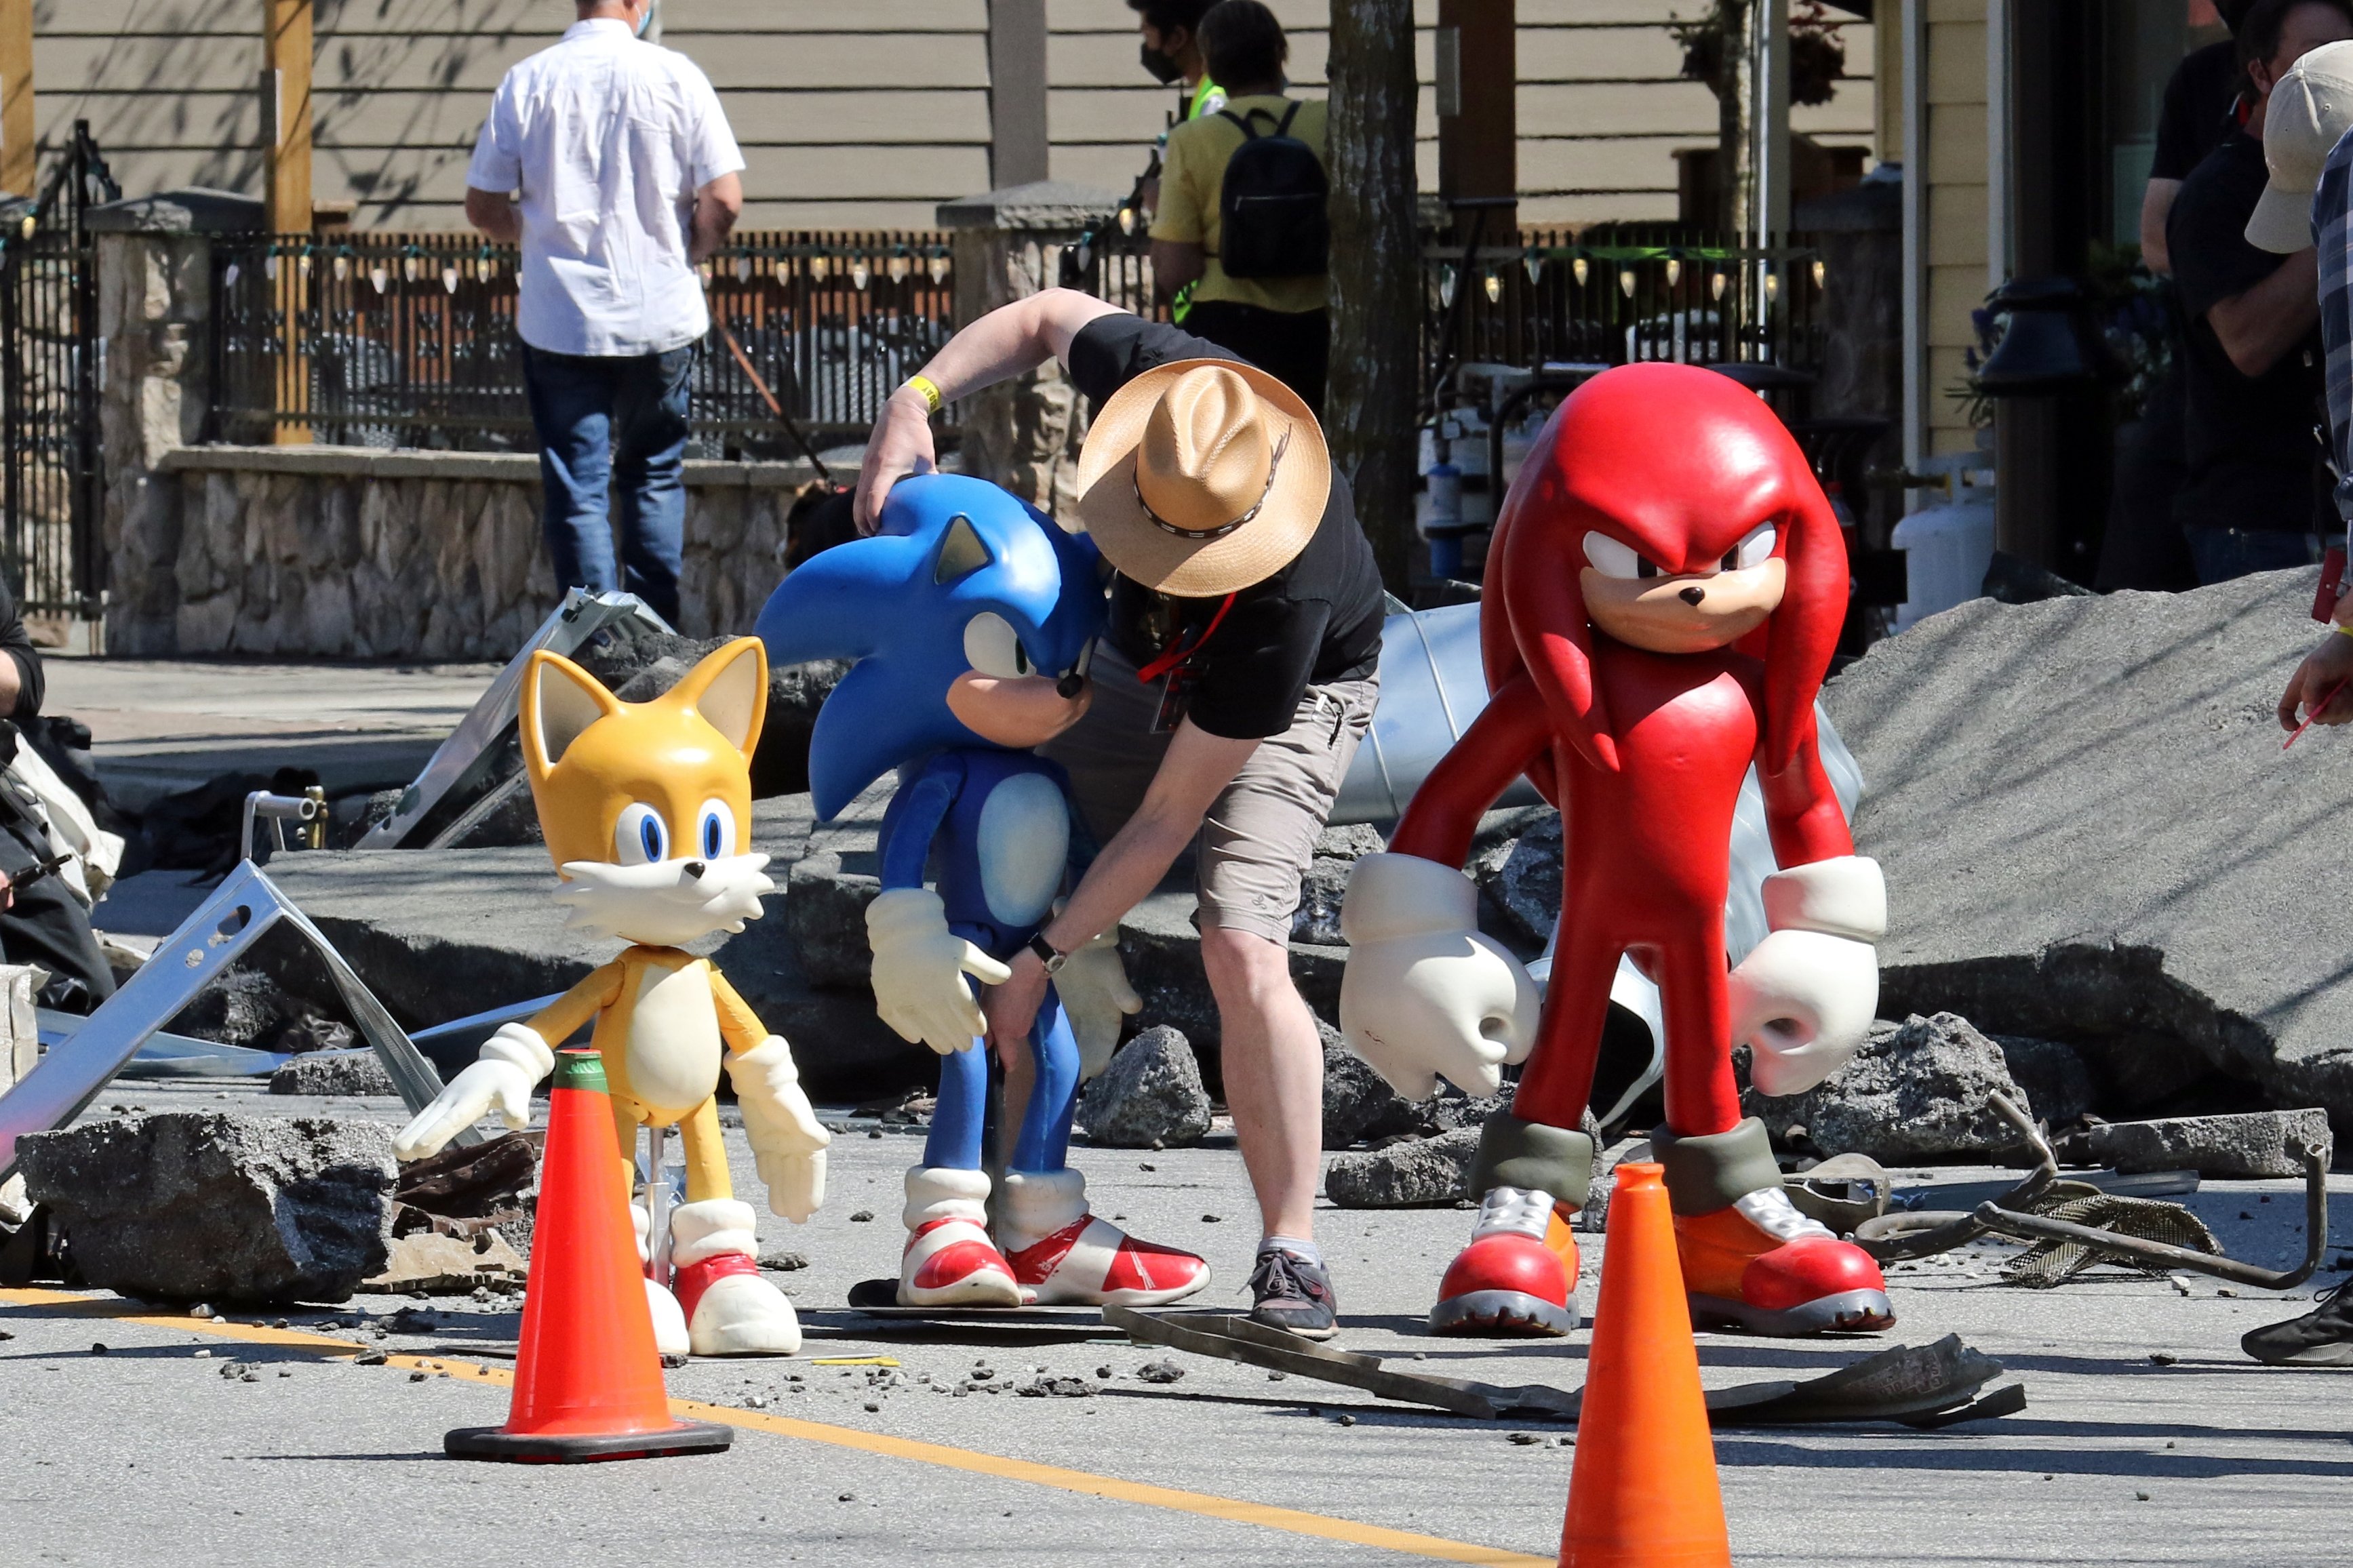 Sonic The Hedgehog SXSW 2020 reveals rescheduled for April